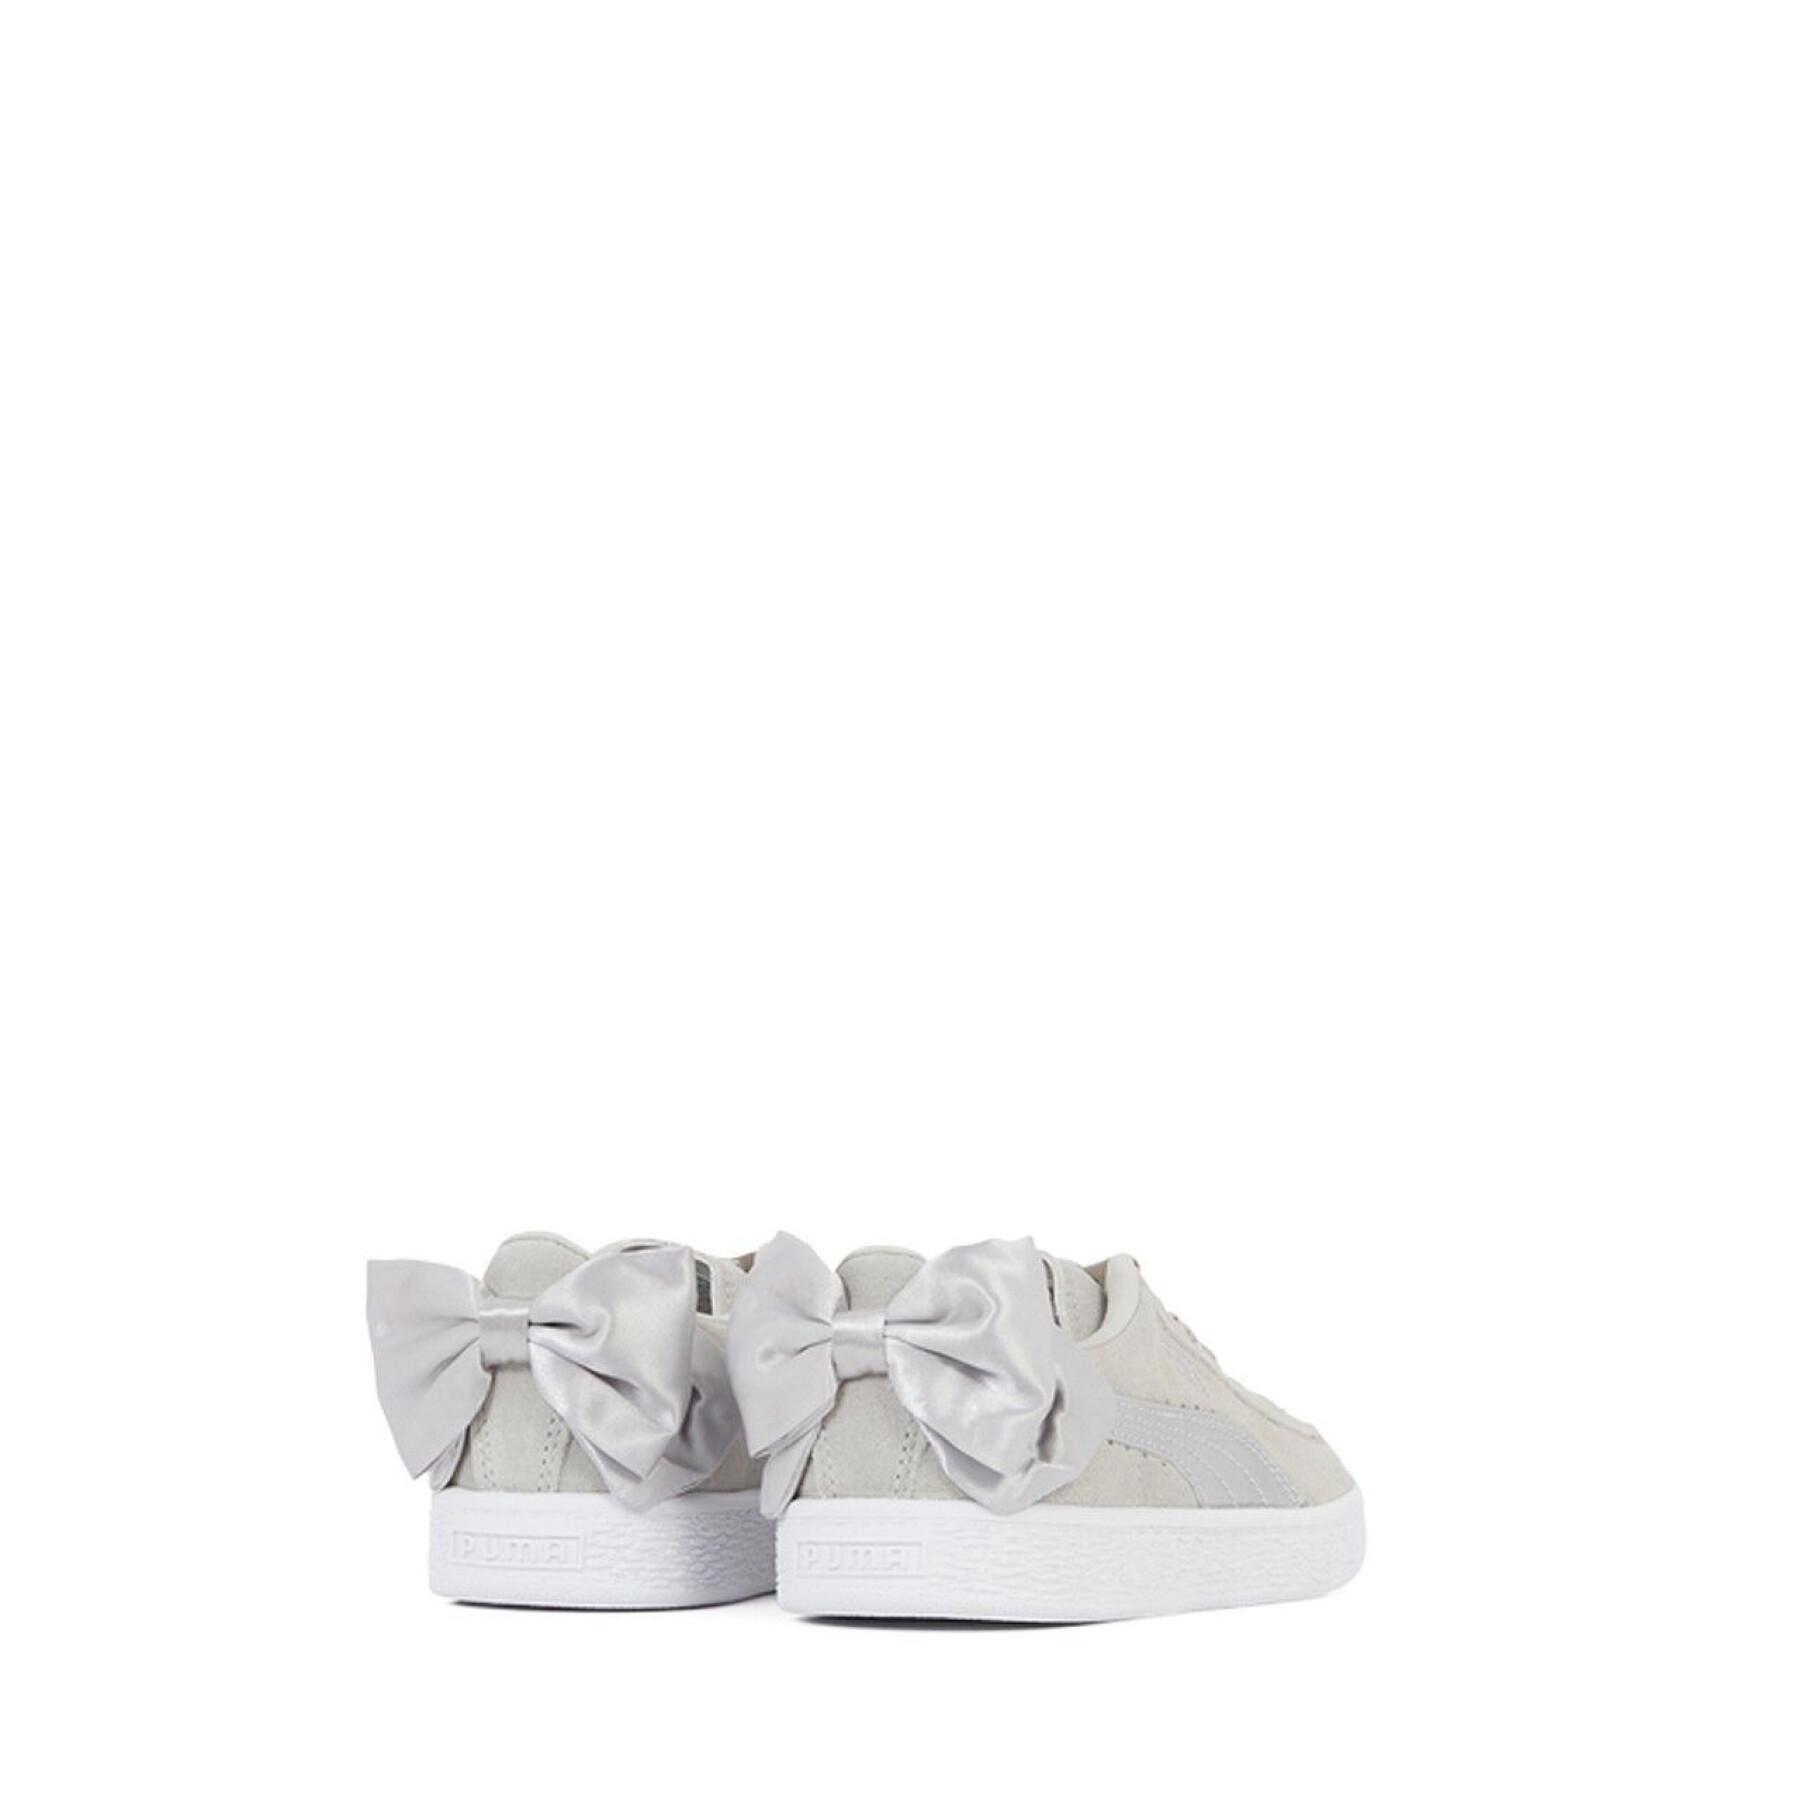 Kindertrainers Puma Suede Bow